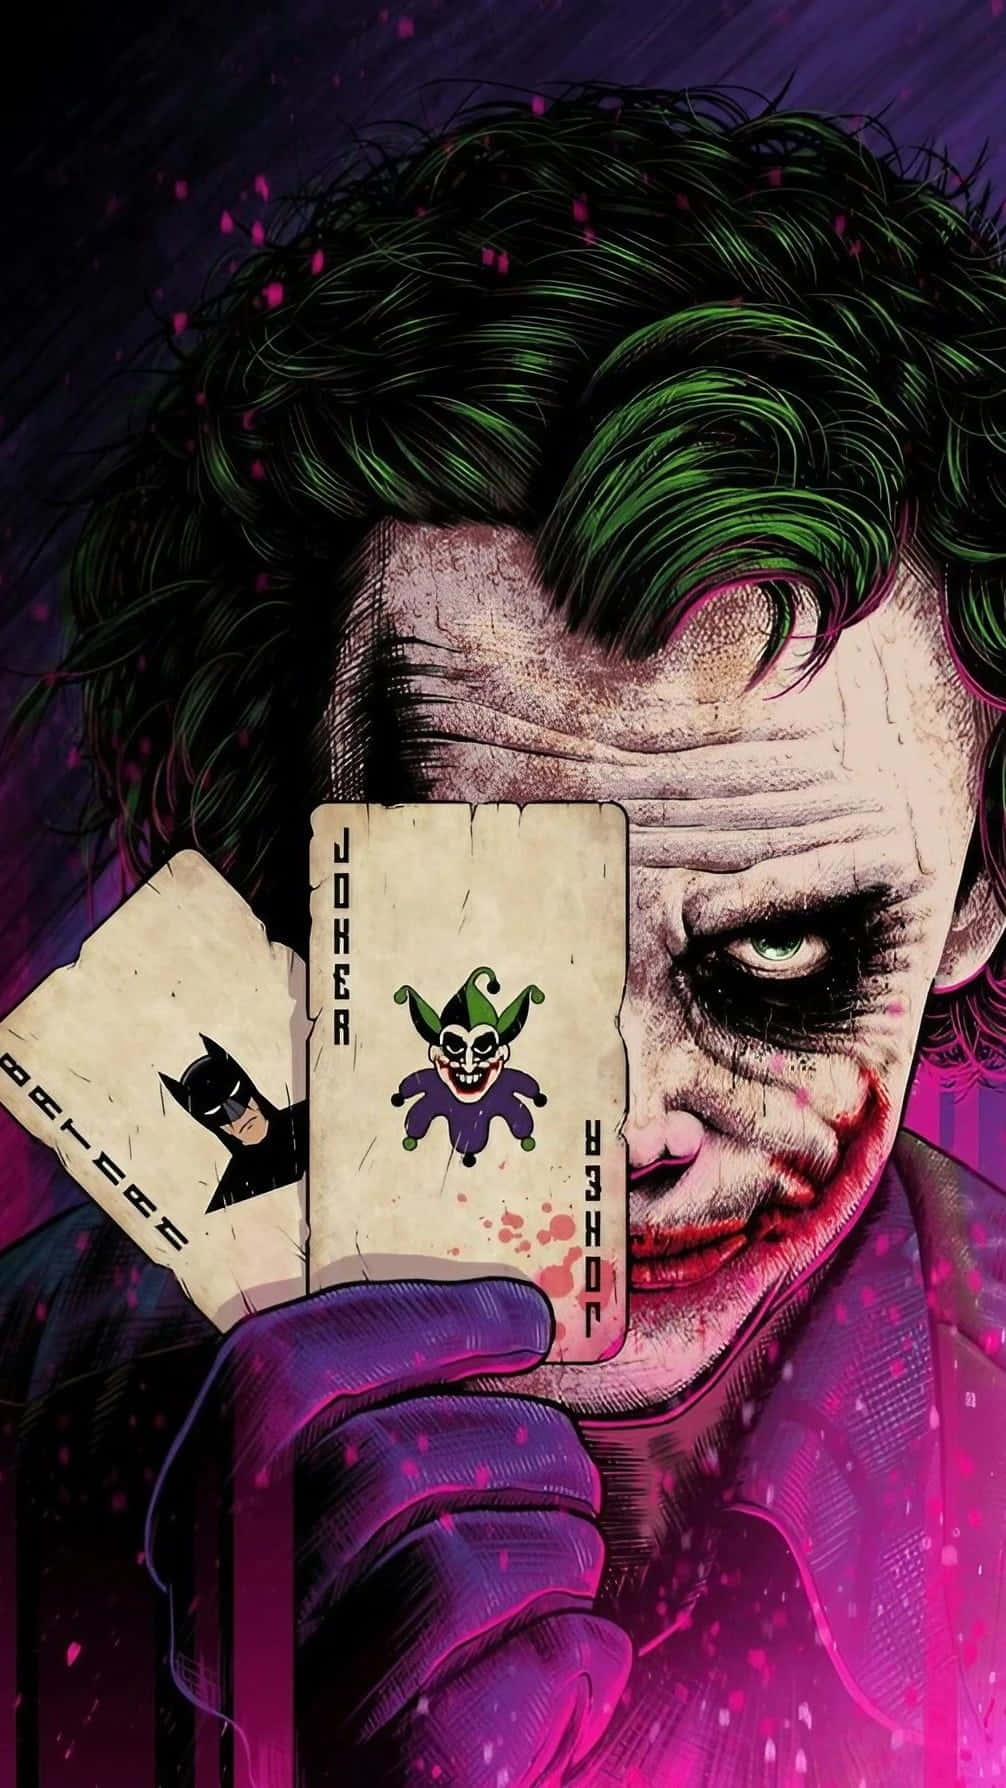 Mysterious Joker Card with Colorful Design Wallpaper